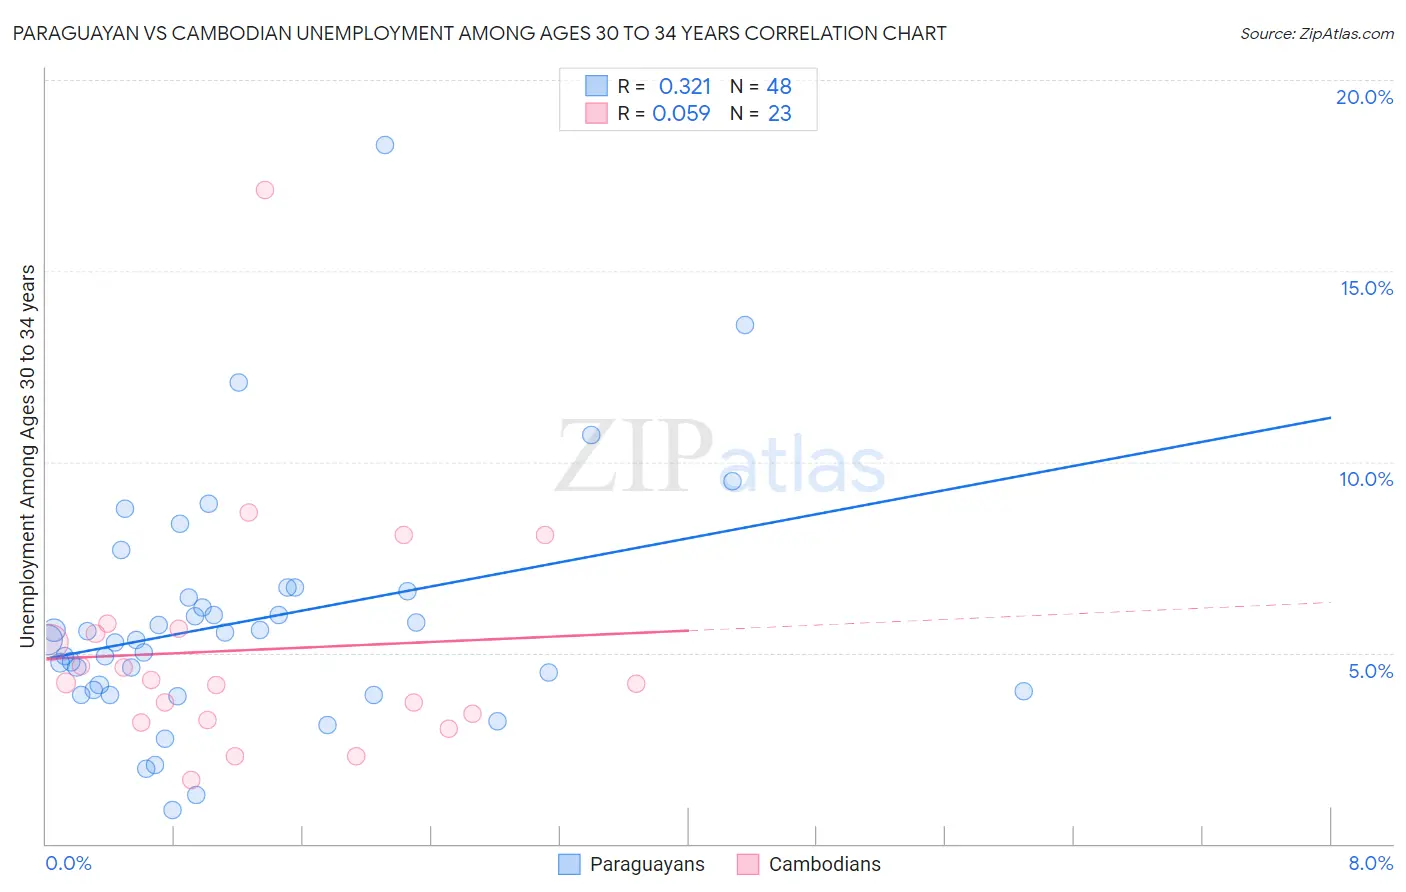 Paraguayan vs Cambodian Unemployment Among Ages 30 to 34 years